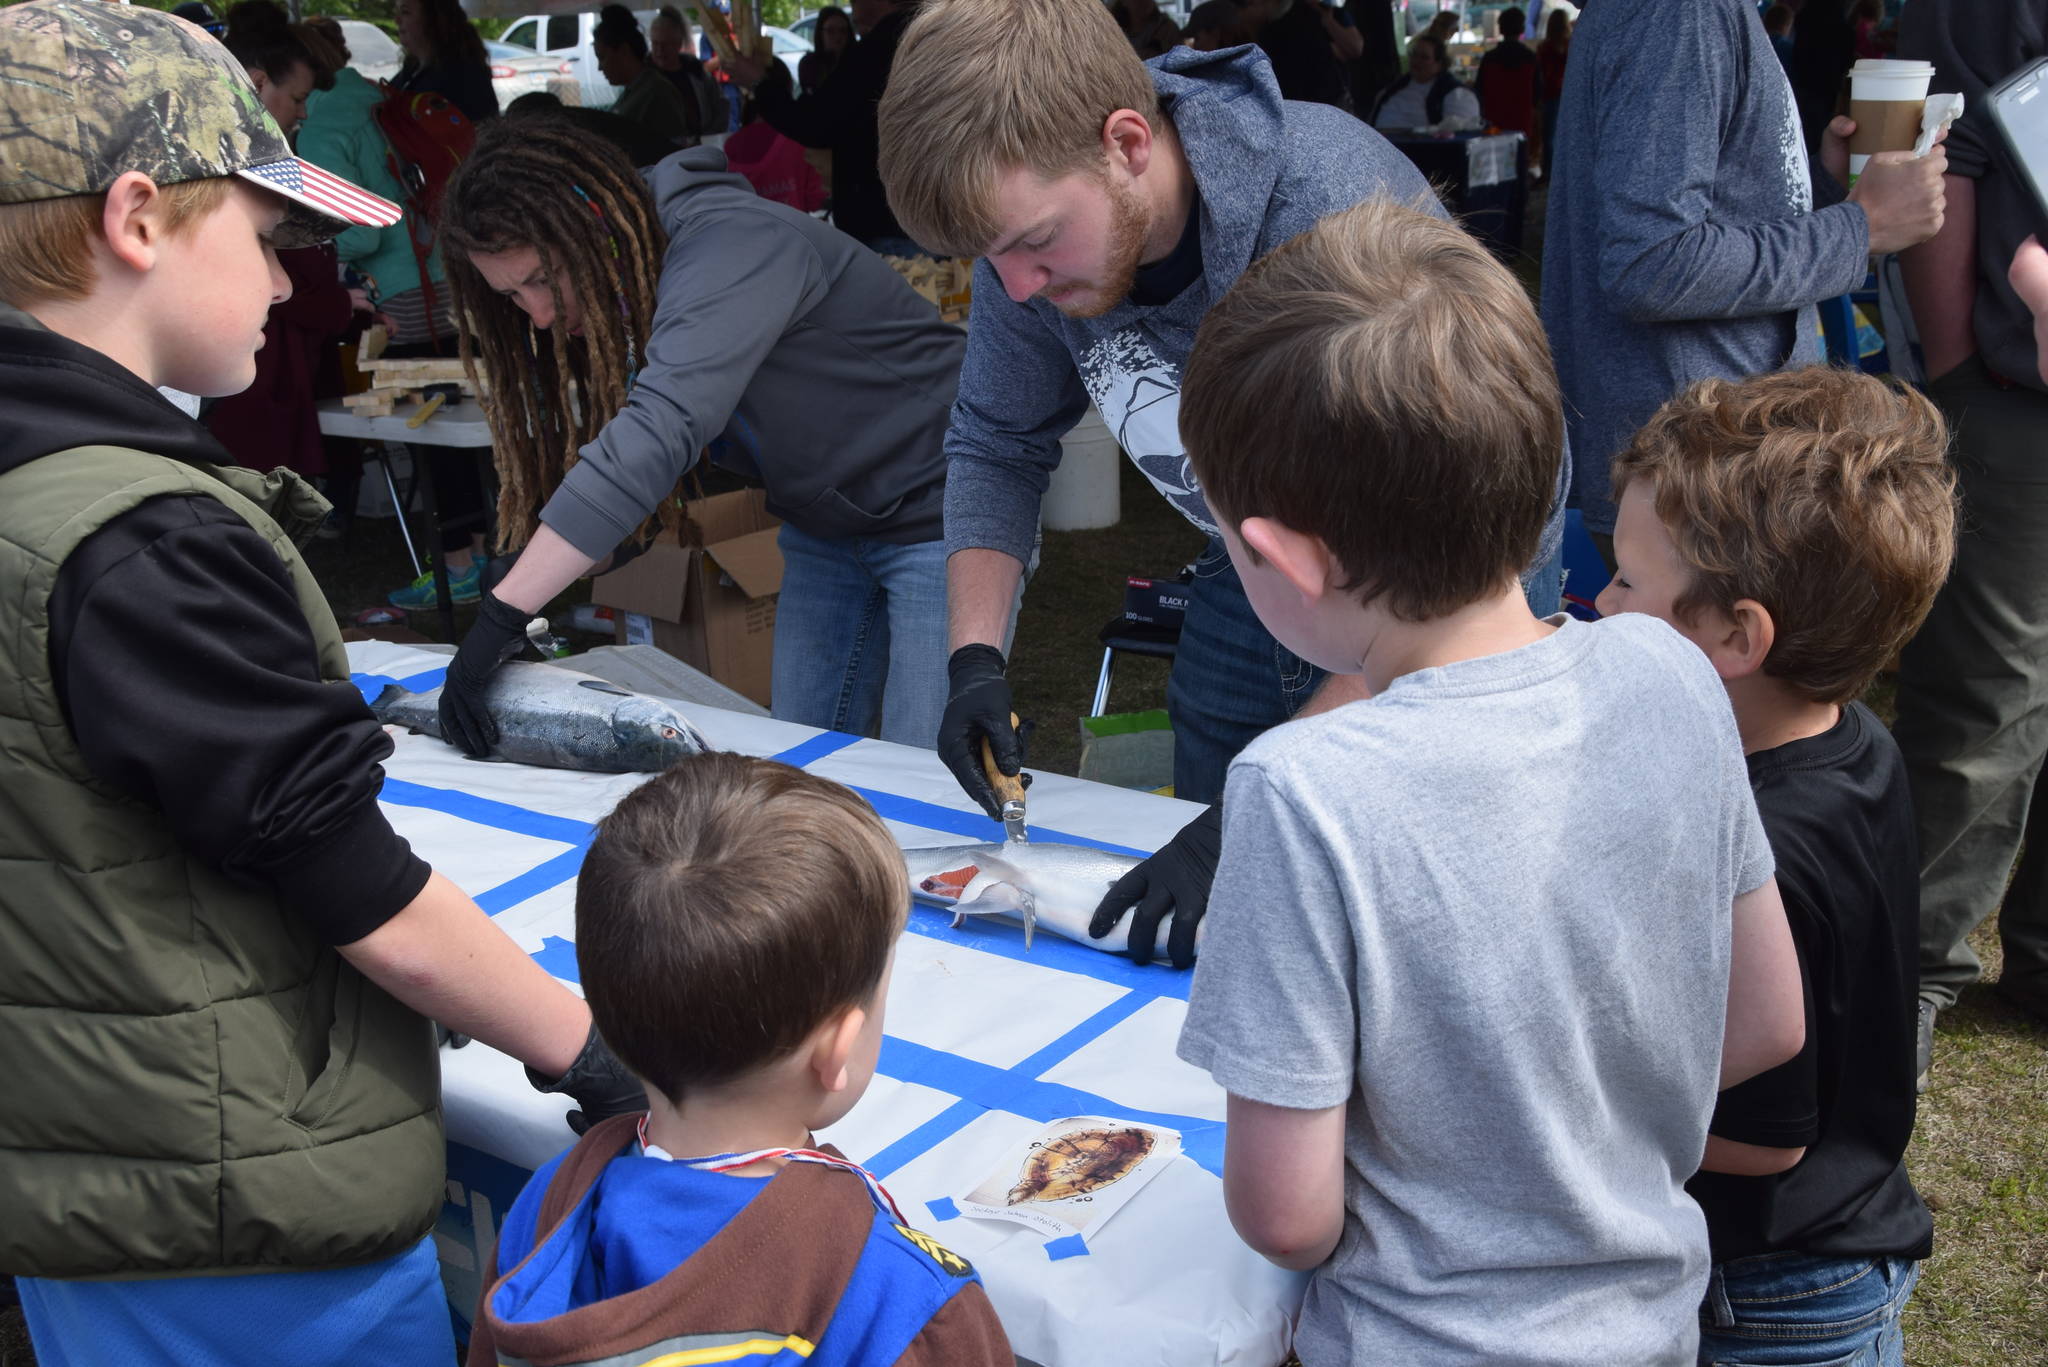 Kids watch as volunteers from Cook Inlet Aquaculture demonstrate how to dissect a salmon during the Kenai River Festival at Soldotna Creek Park in Soldotna, Alaska on June 8, 2019. (Photo by Brian Mazurek/Peninsula Clarion)